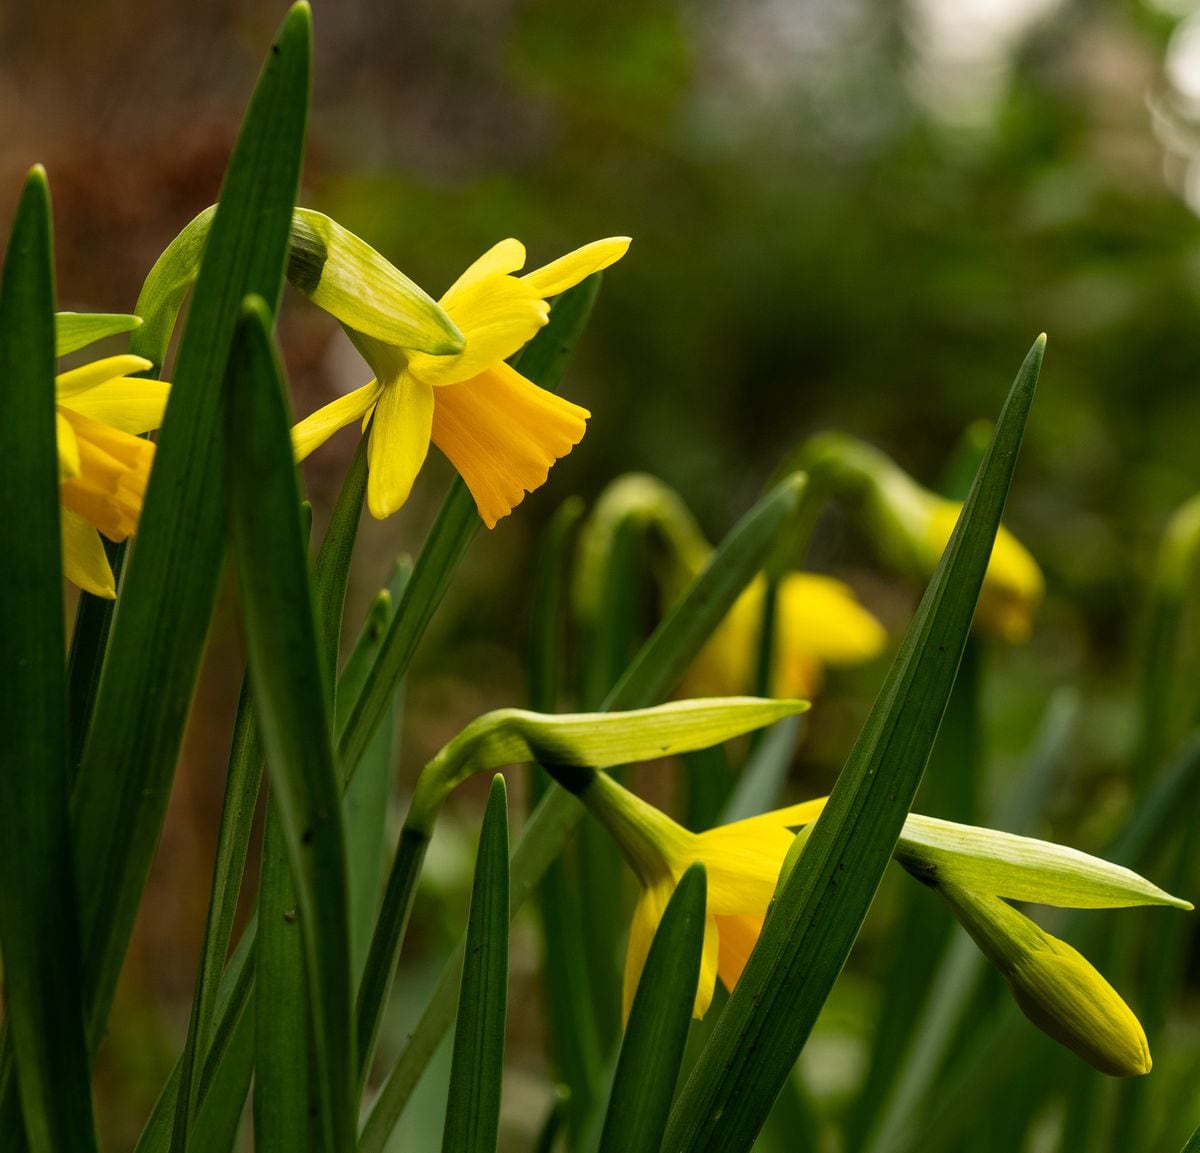 King Alfred Daffodils at allotment. (Picture by Richard Leighton-Hammond) (30765347)